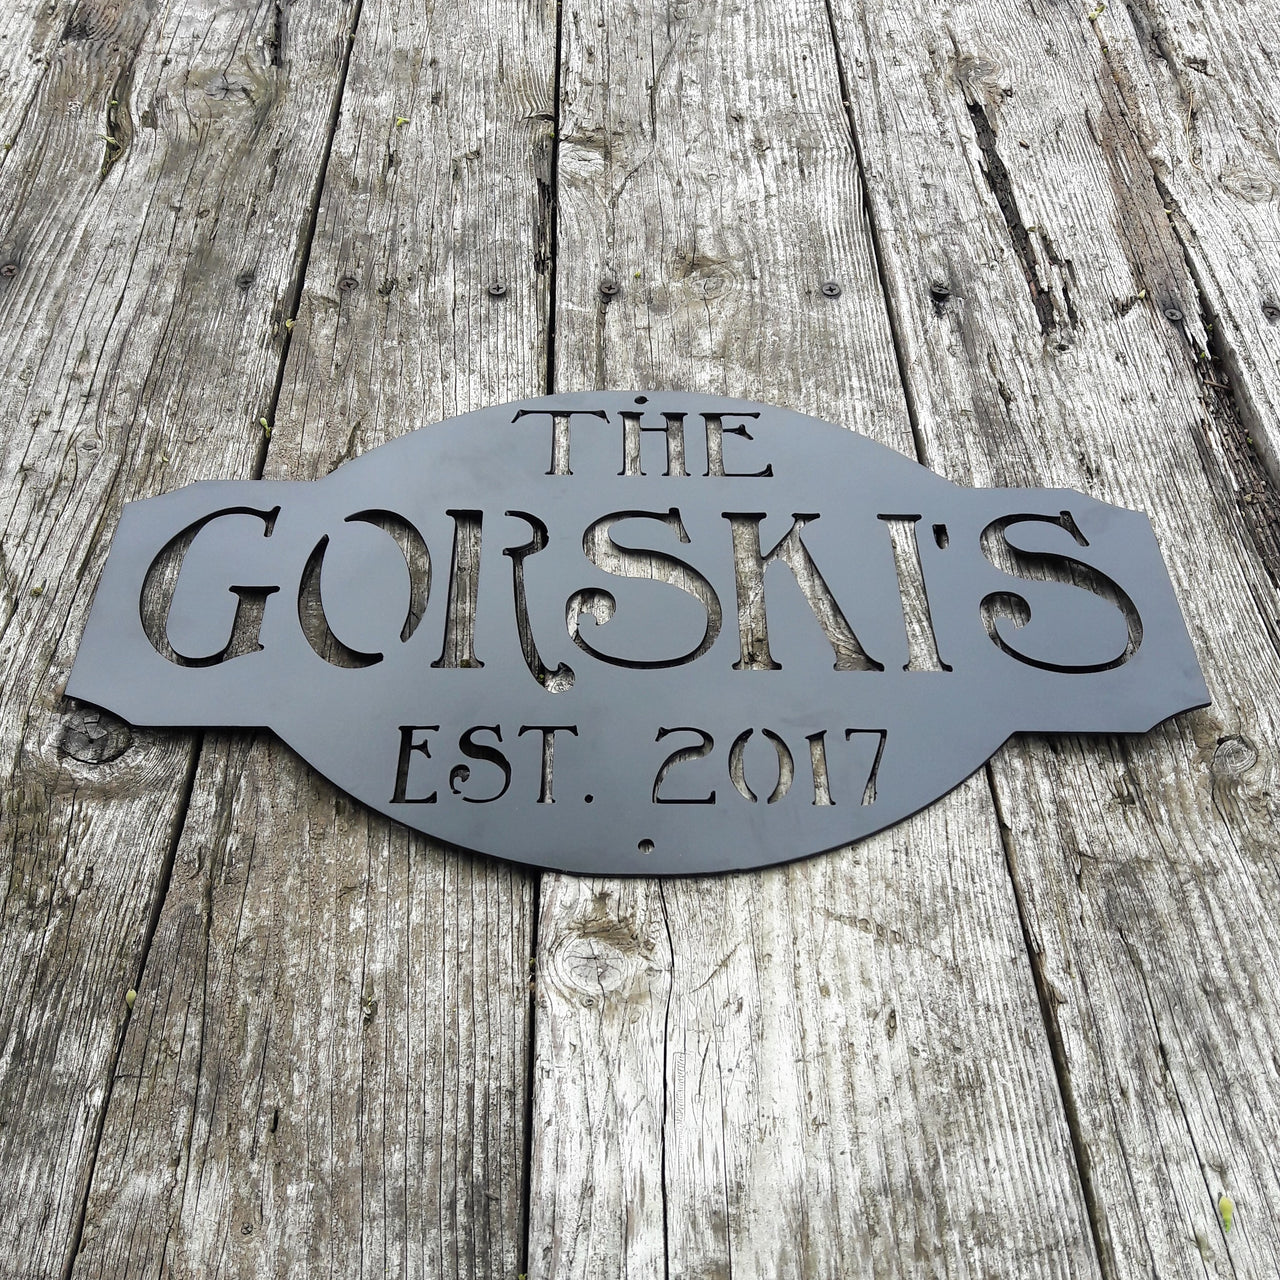 Rustic metal sign outdoor black powder coated. The sign reads, " The Gorski's est. 2017"